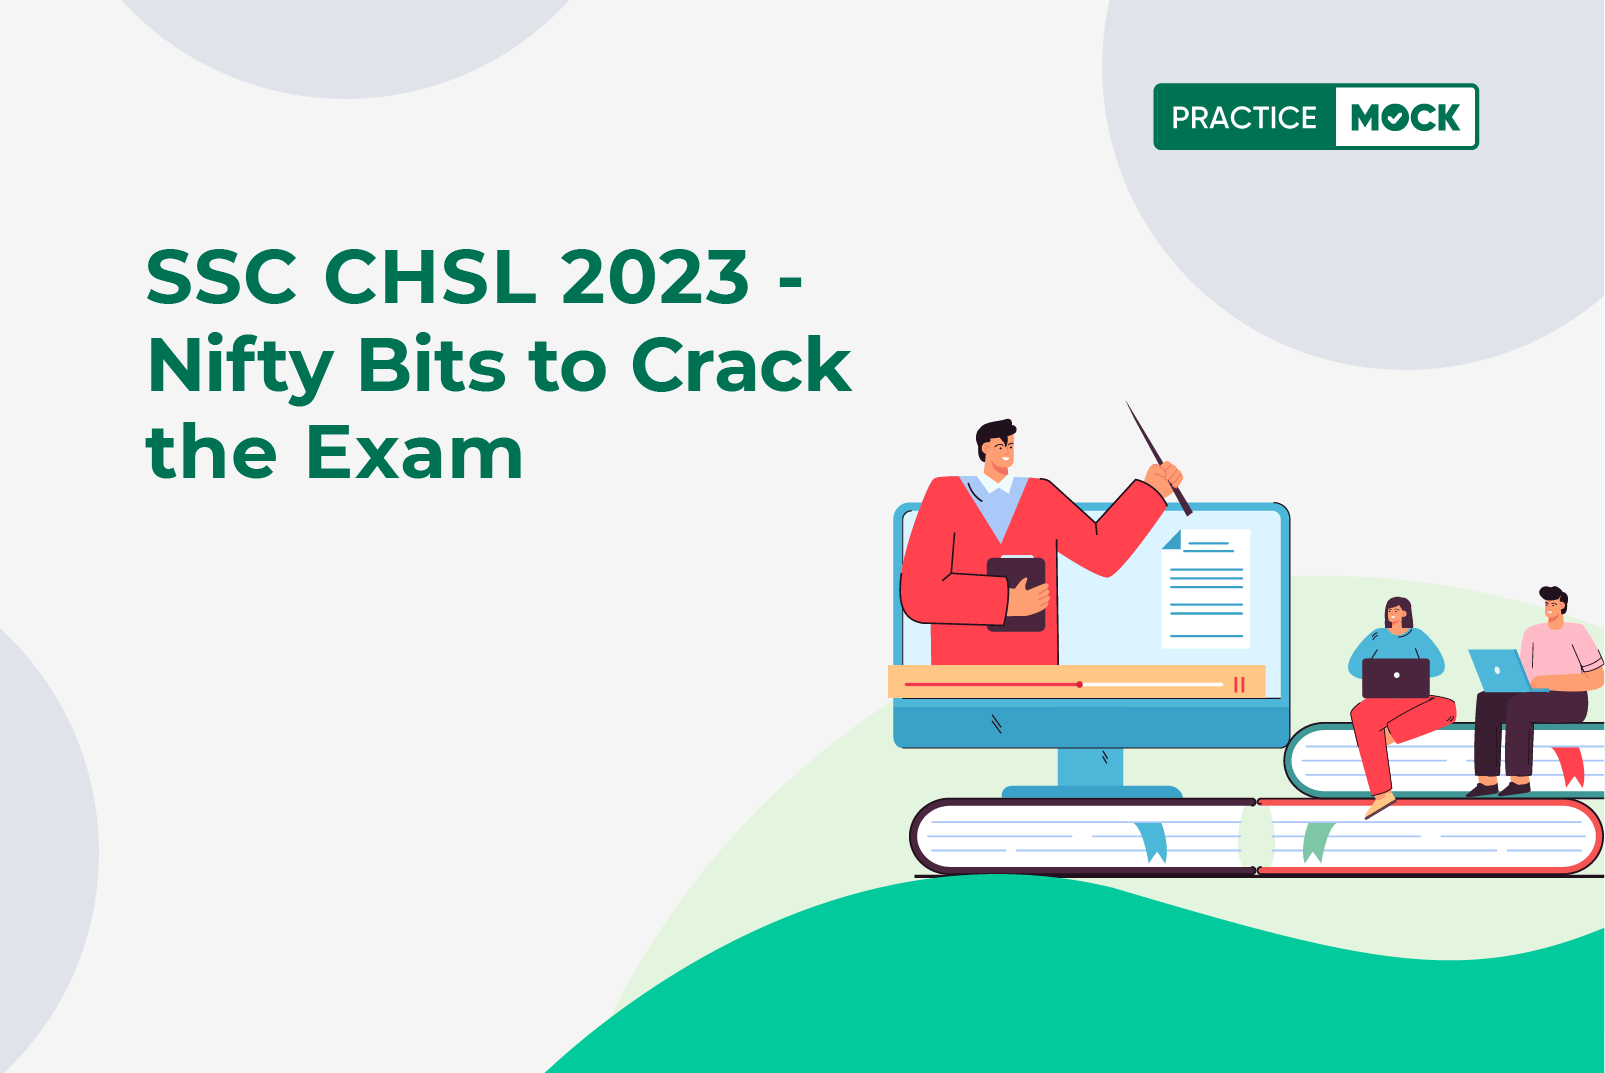 SSC CHSL 2023 - Nifty Bits to Crack the Exam